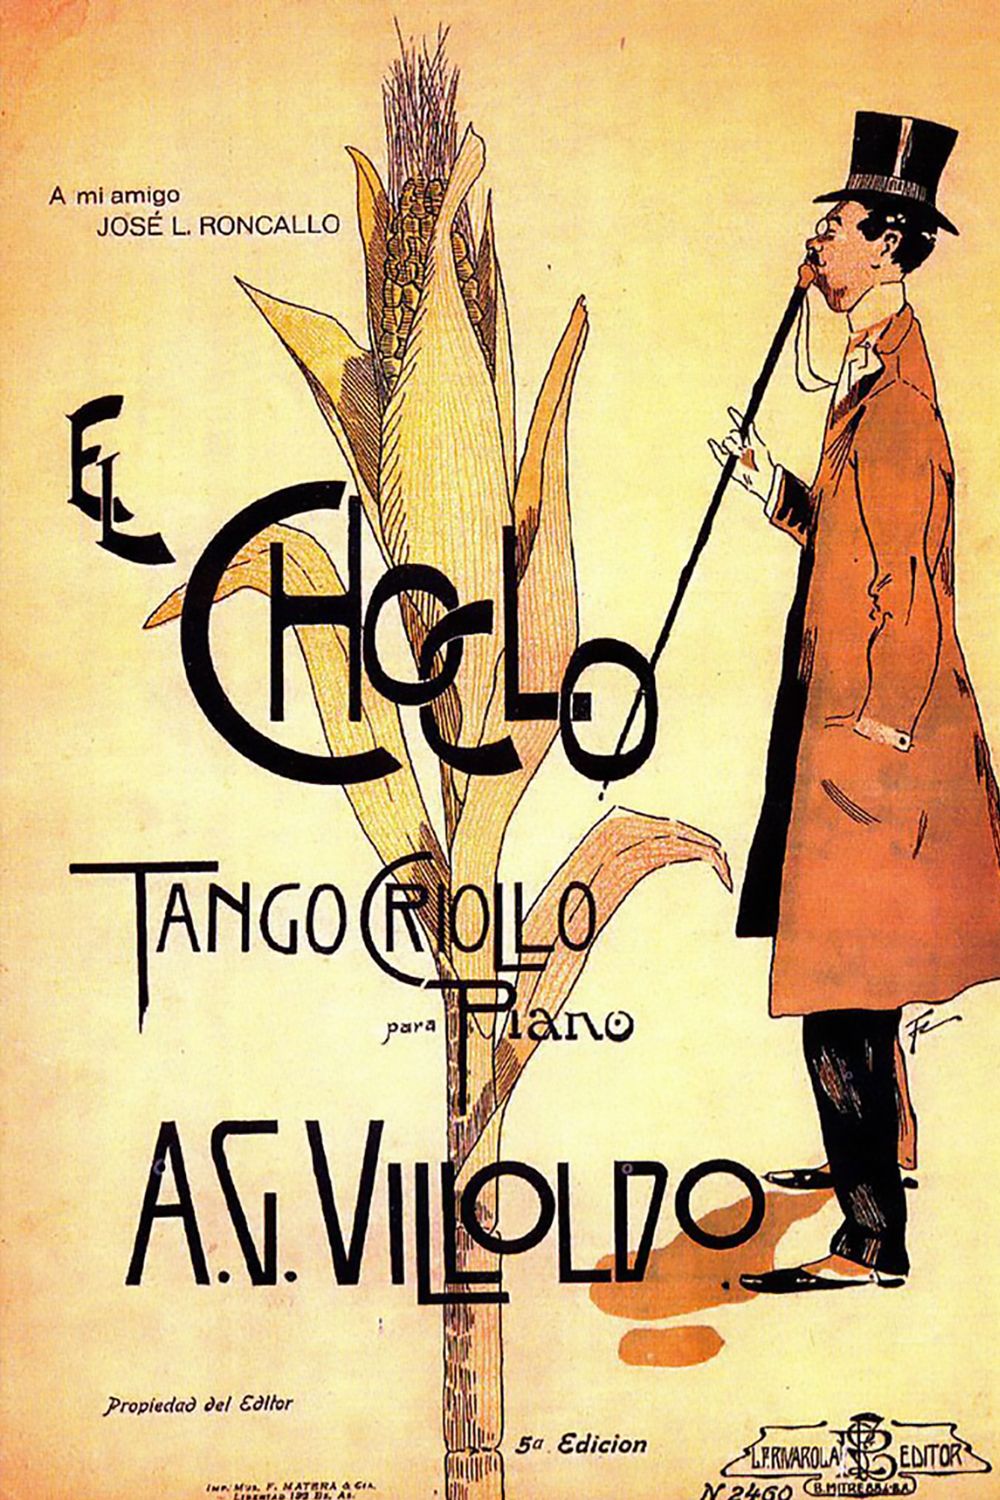 El Choclo, Argentine Tango music sheet cover.